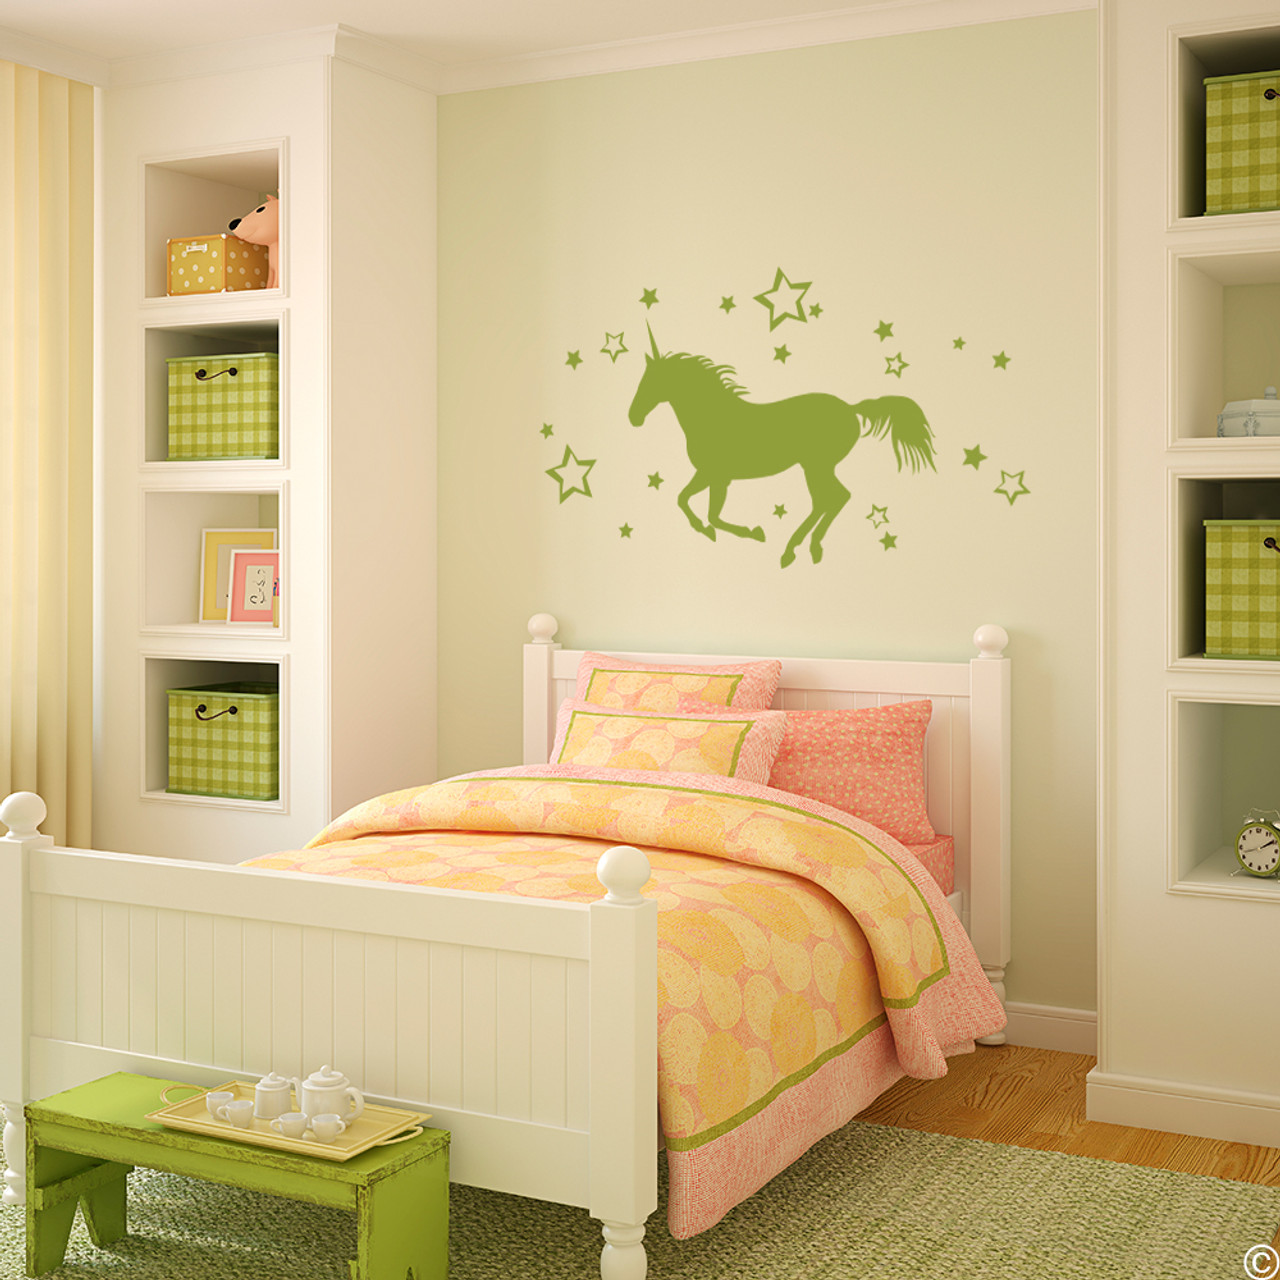 Unicorn Vinyl Wall Decal in olive